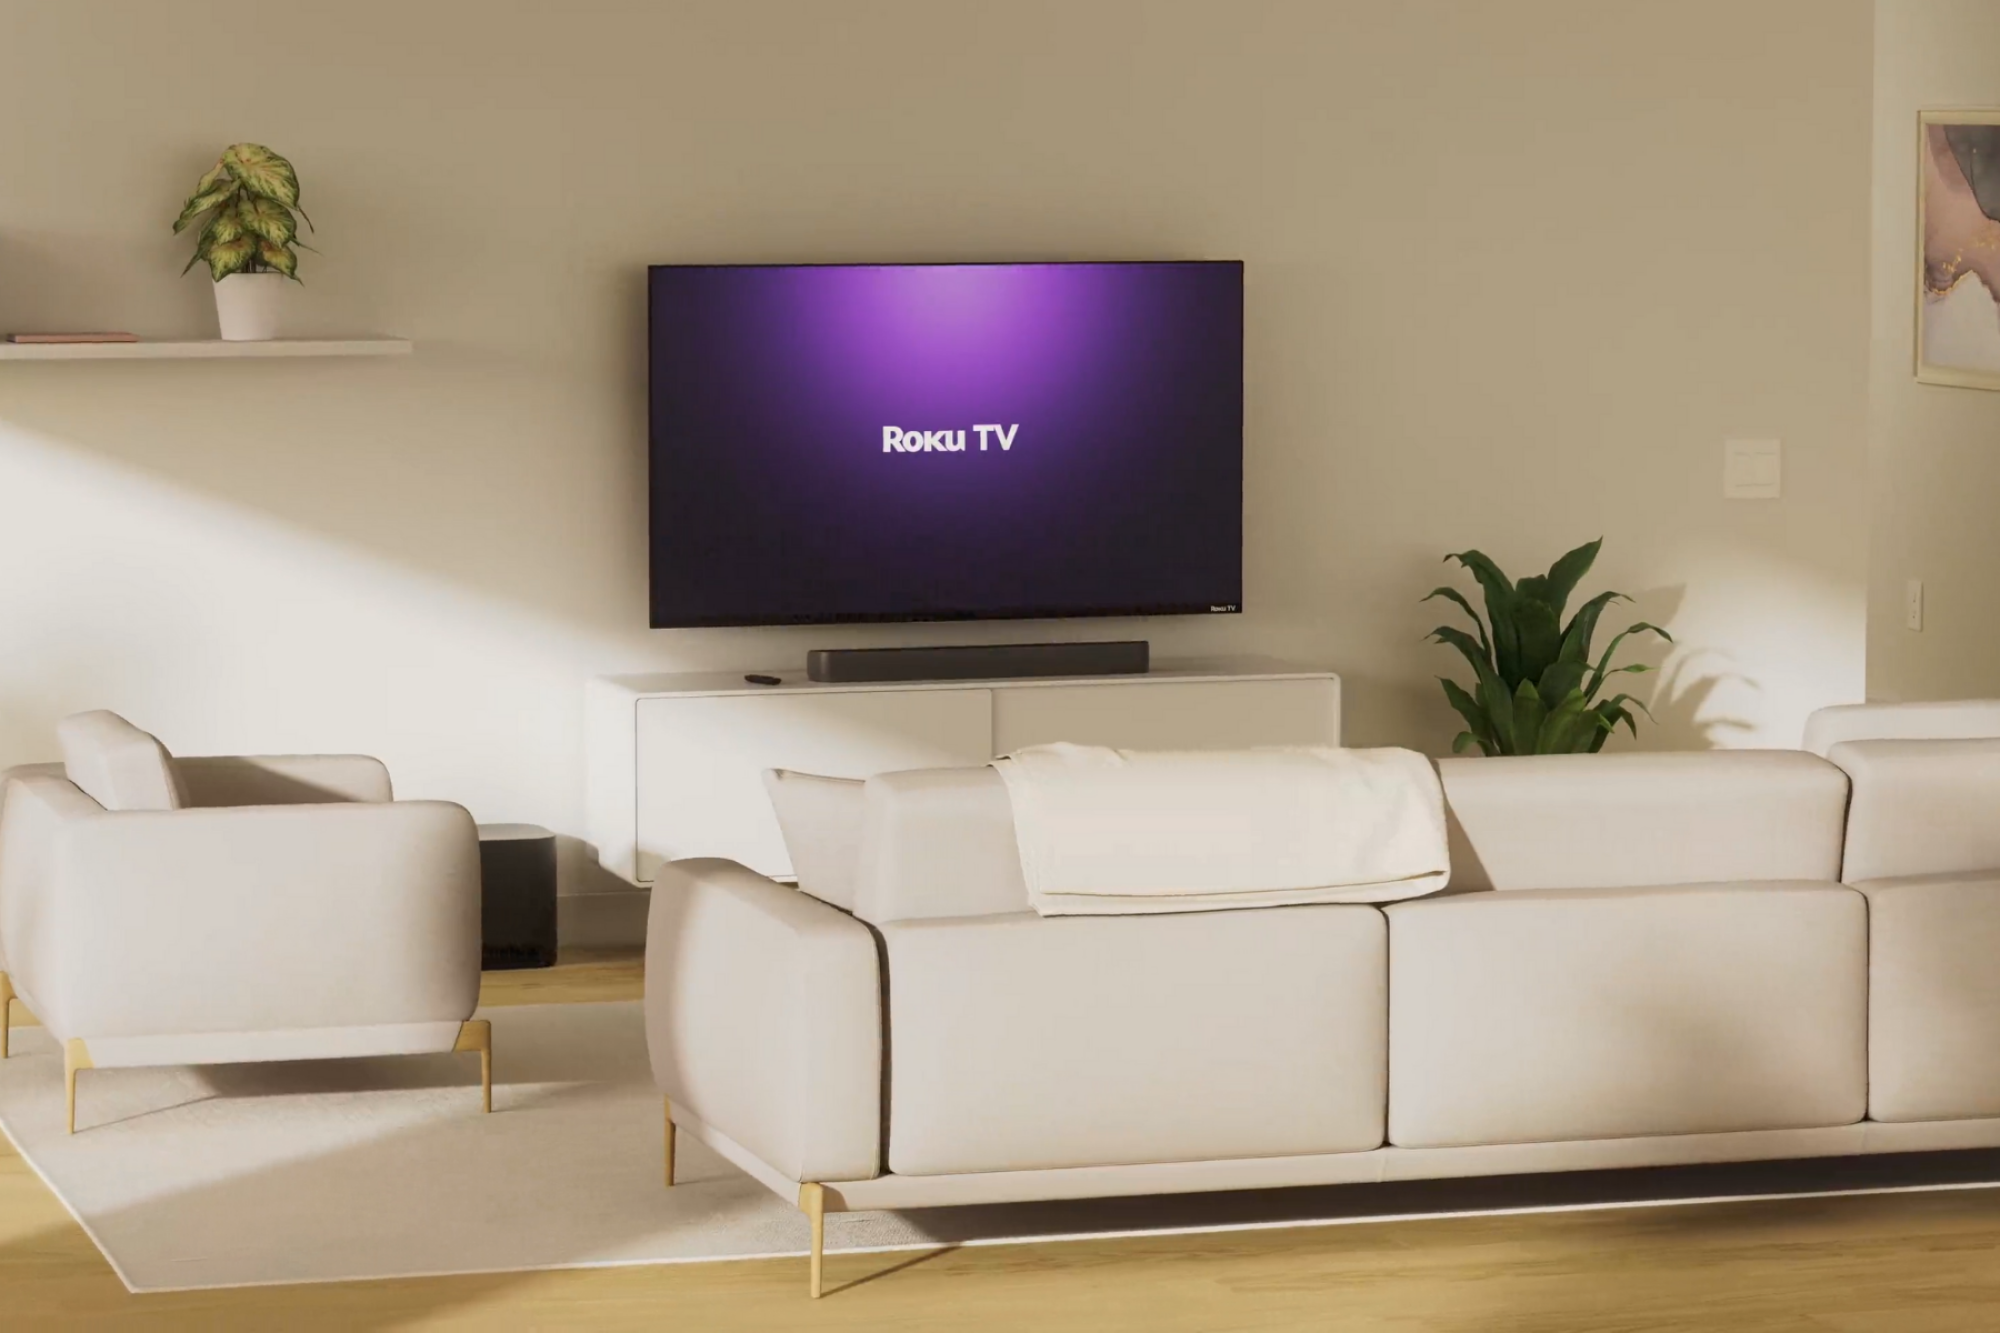 Roku TV hanging on wall beside shelf with furniture in foreground